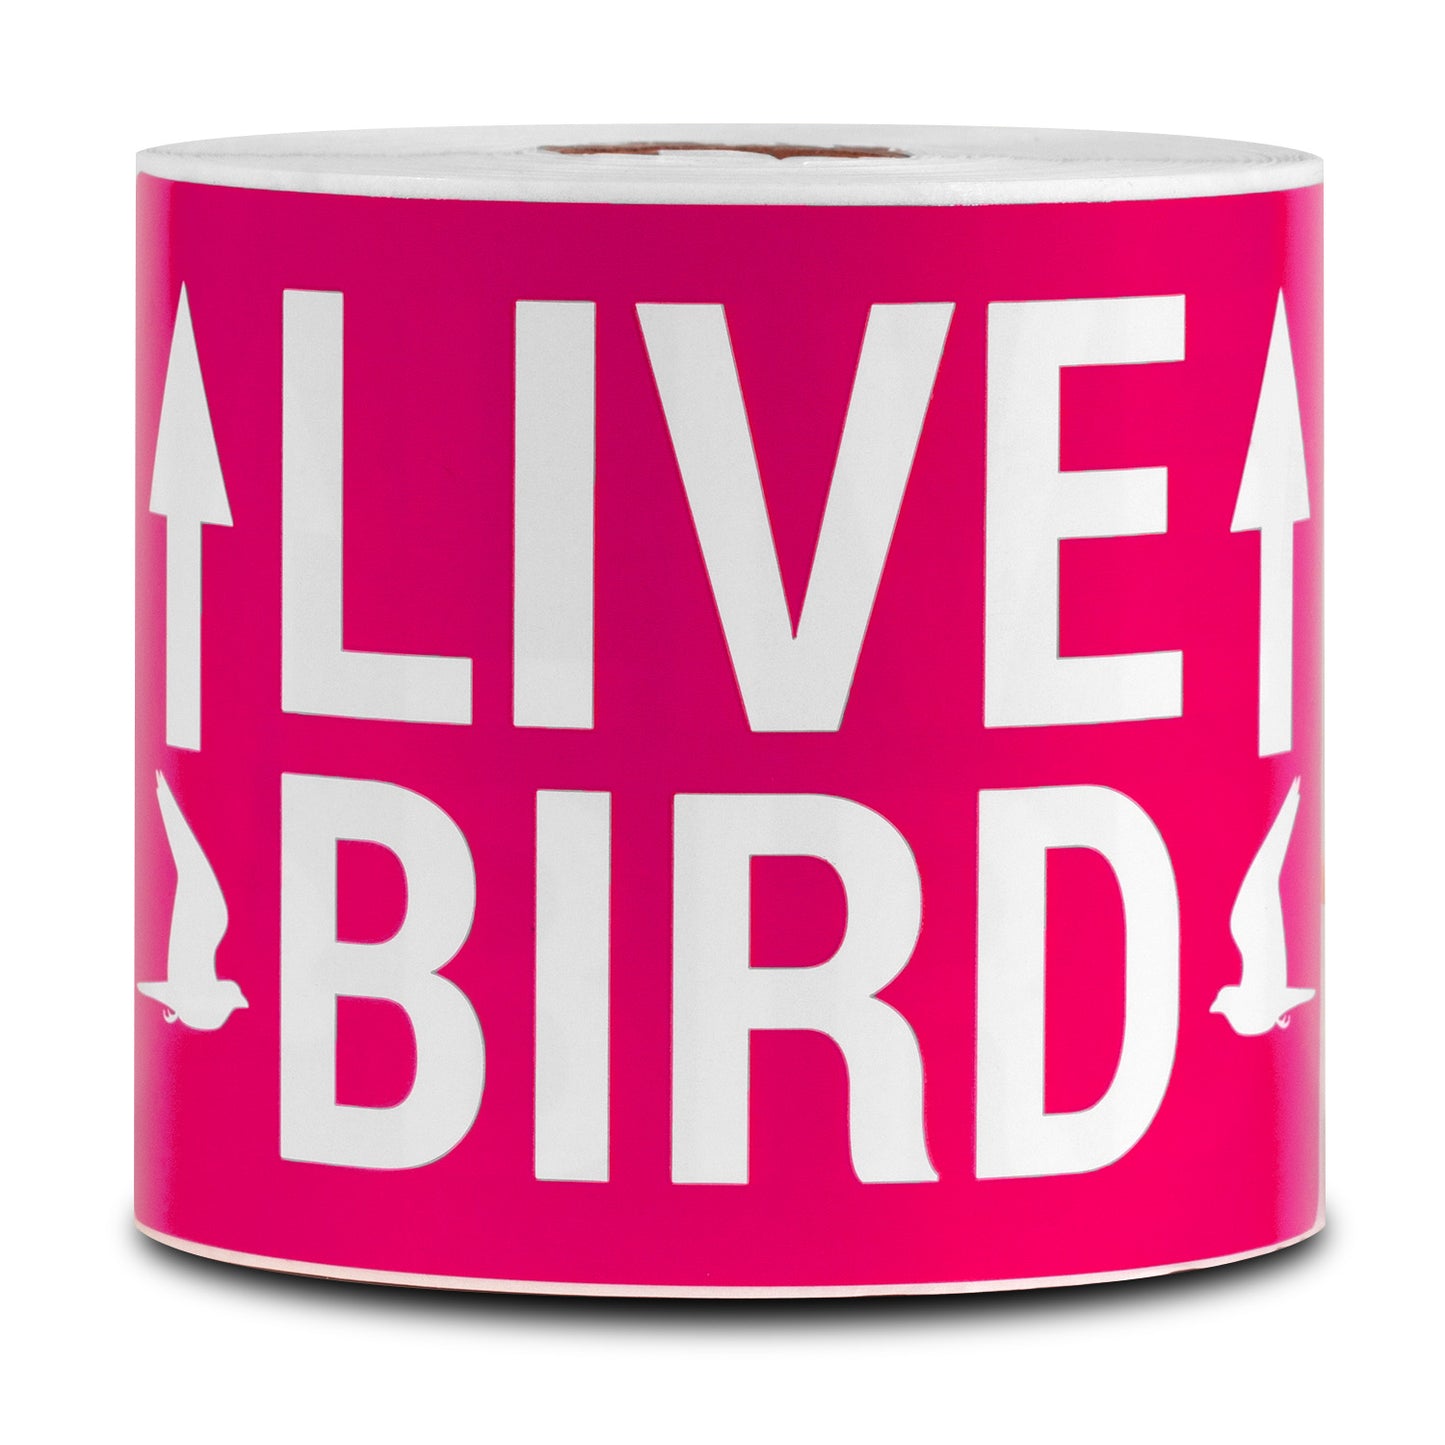 5 x 3 inch | Shipping & Handling: This Side Up, Live Bird Stickers